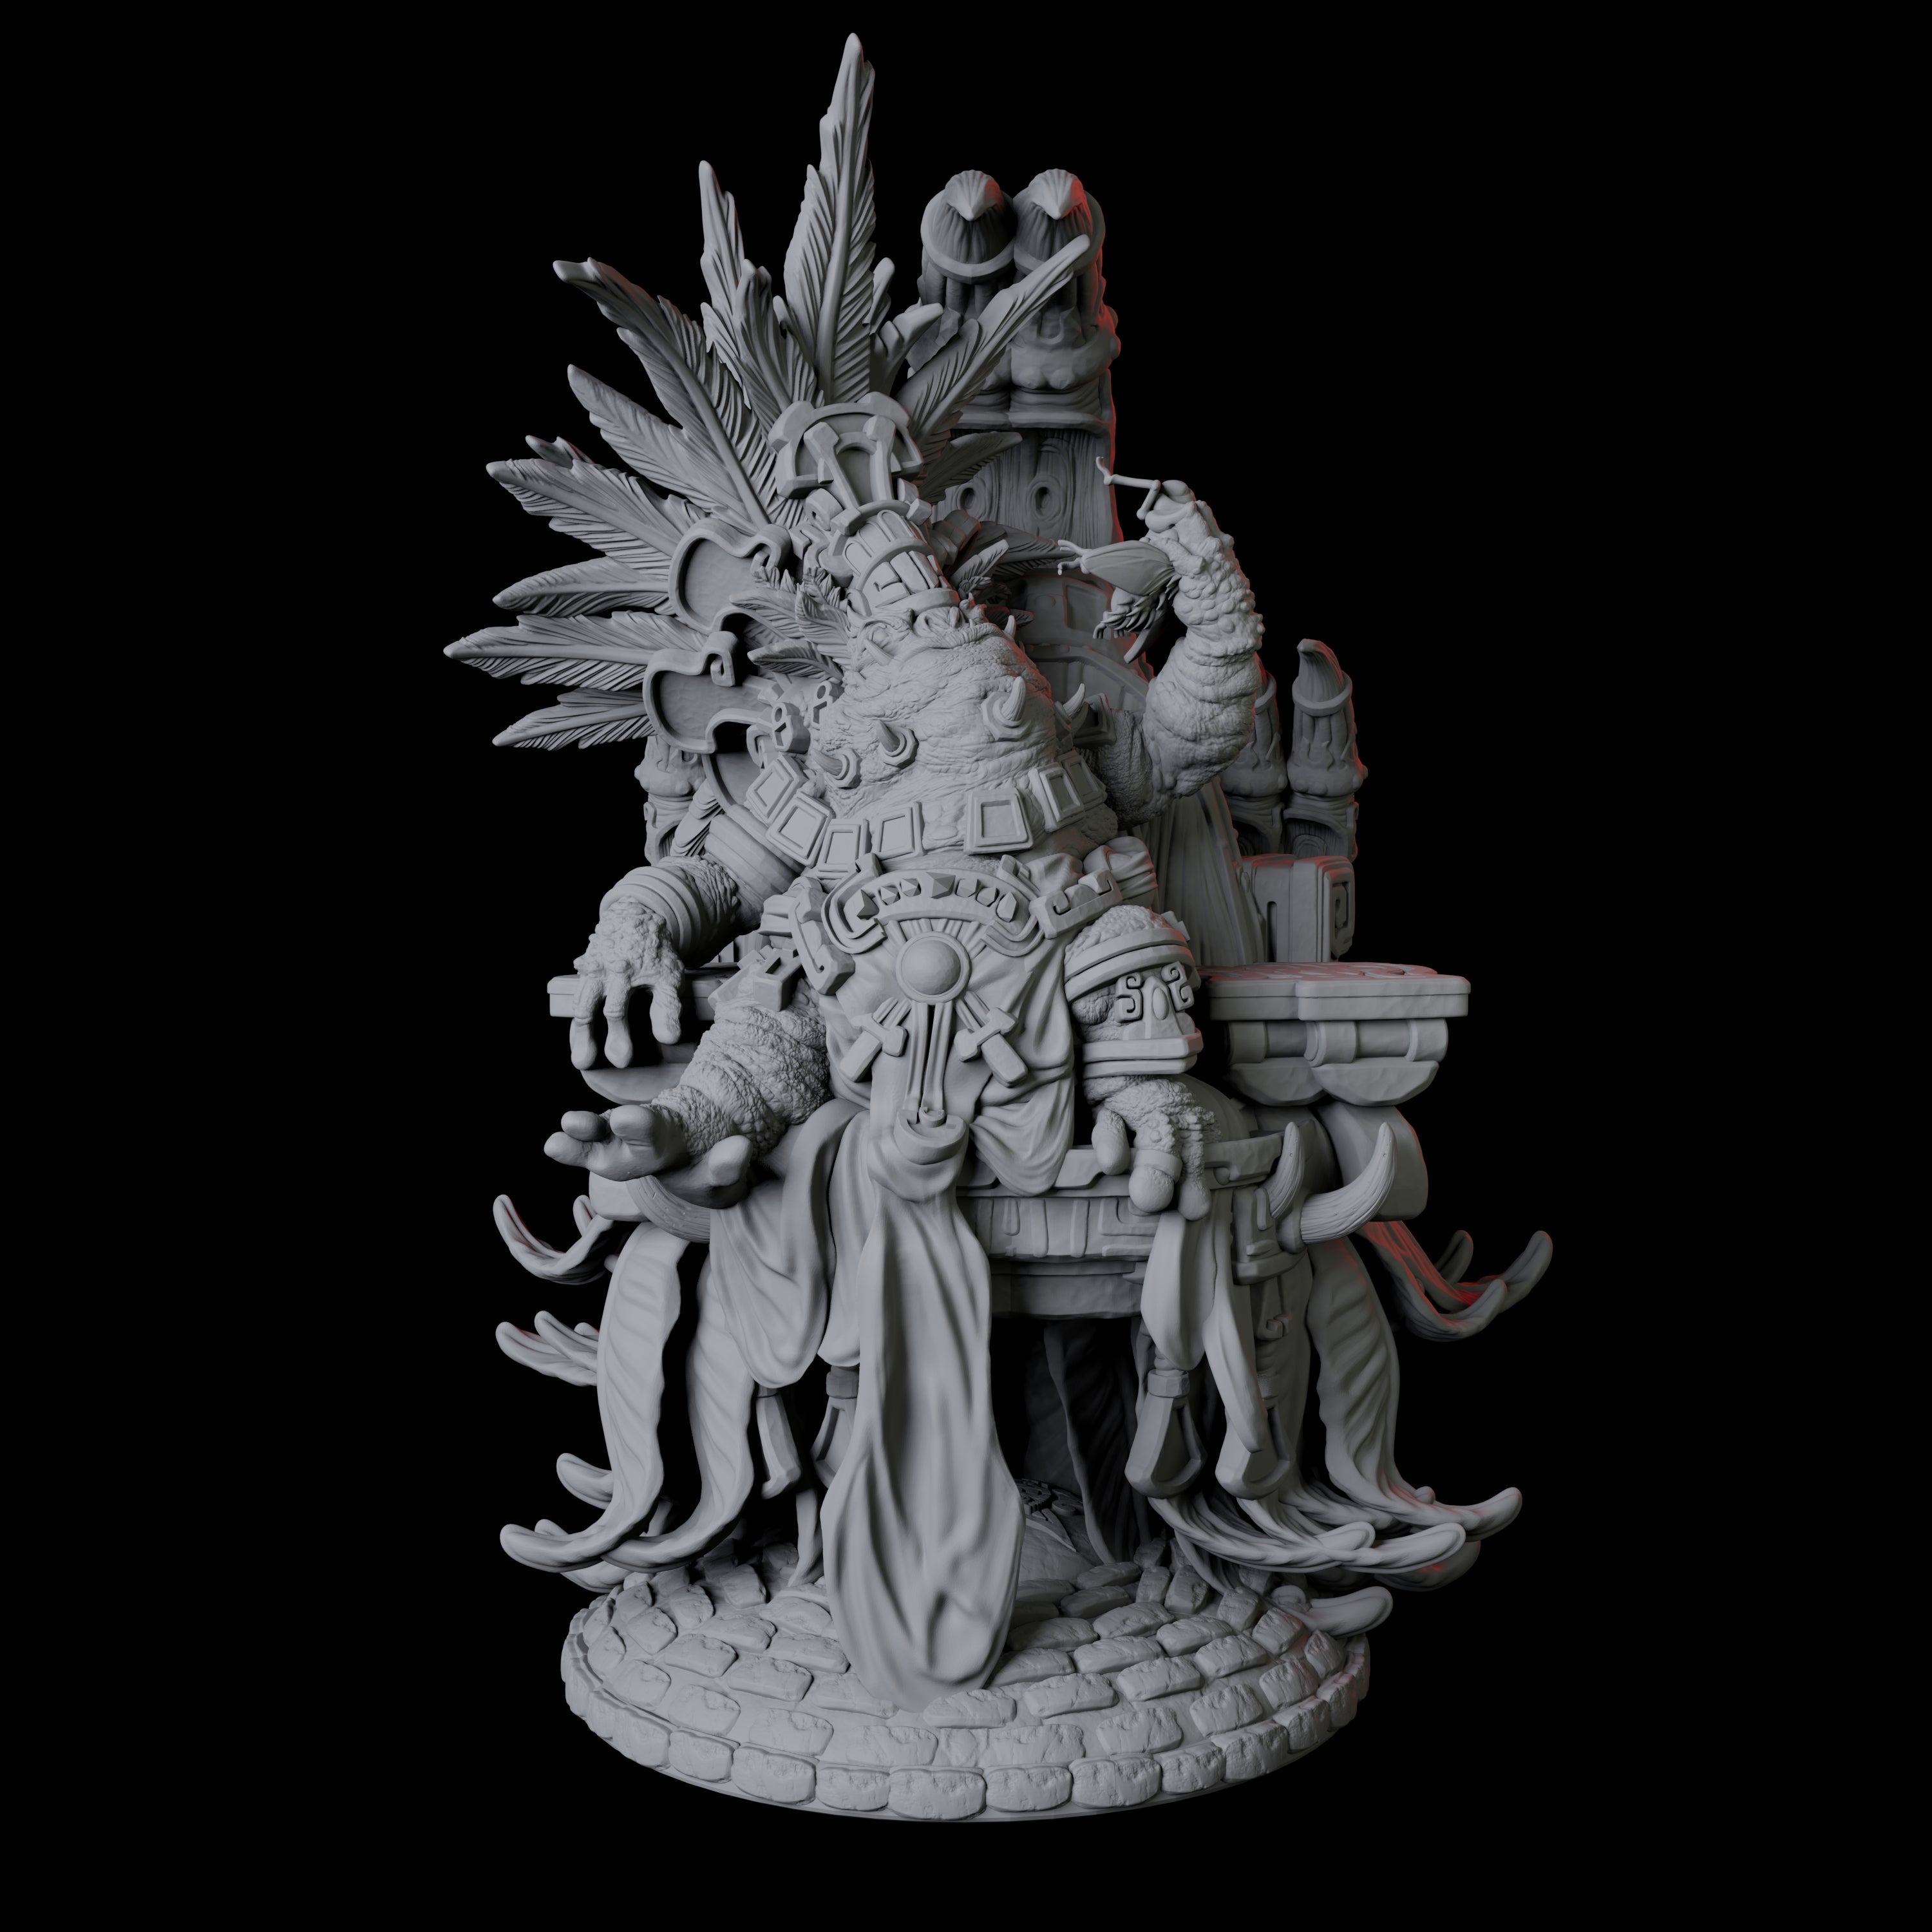 Slaad High Priest Miniature for Dungeons and Dragons, Pathfinder or other TTRPGs